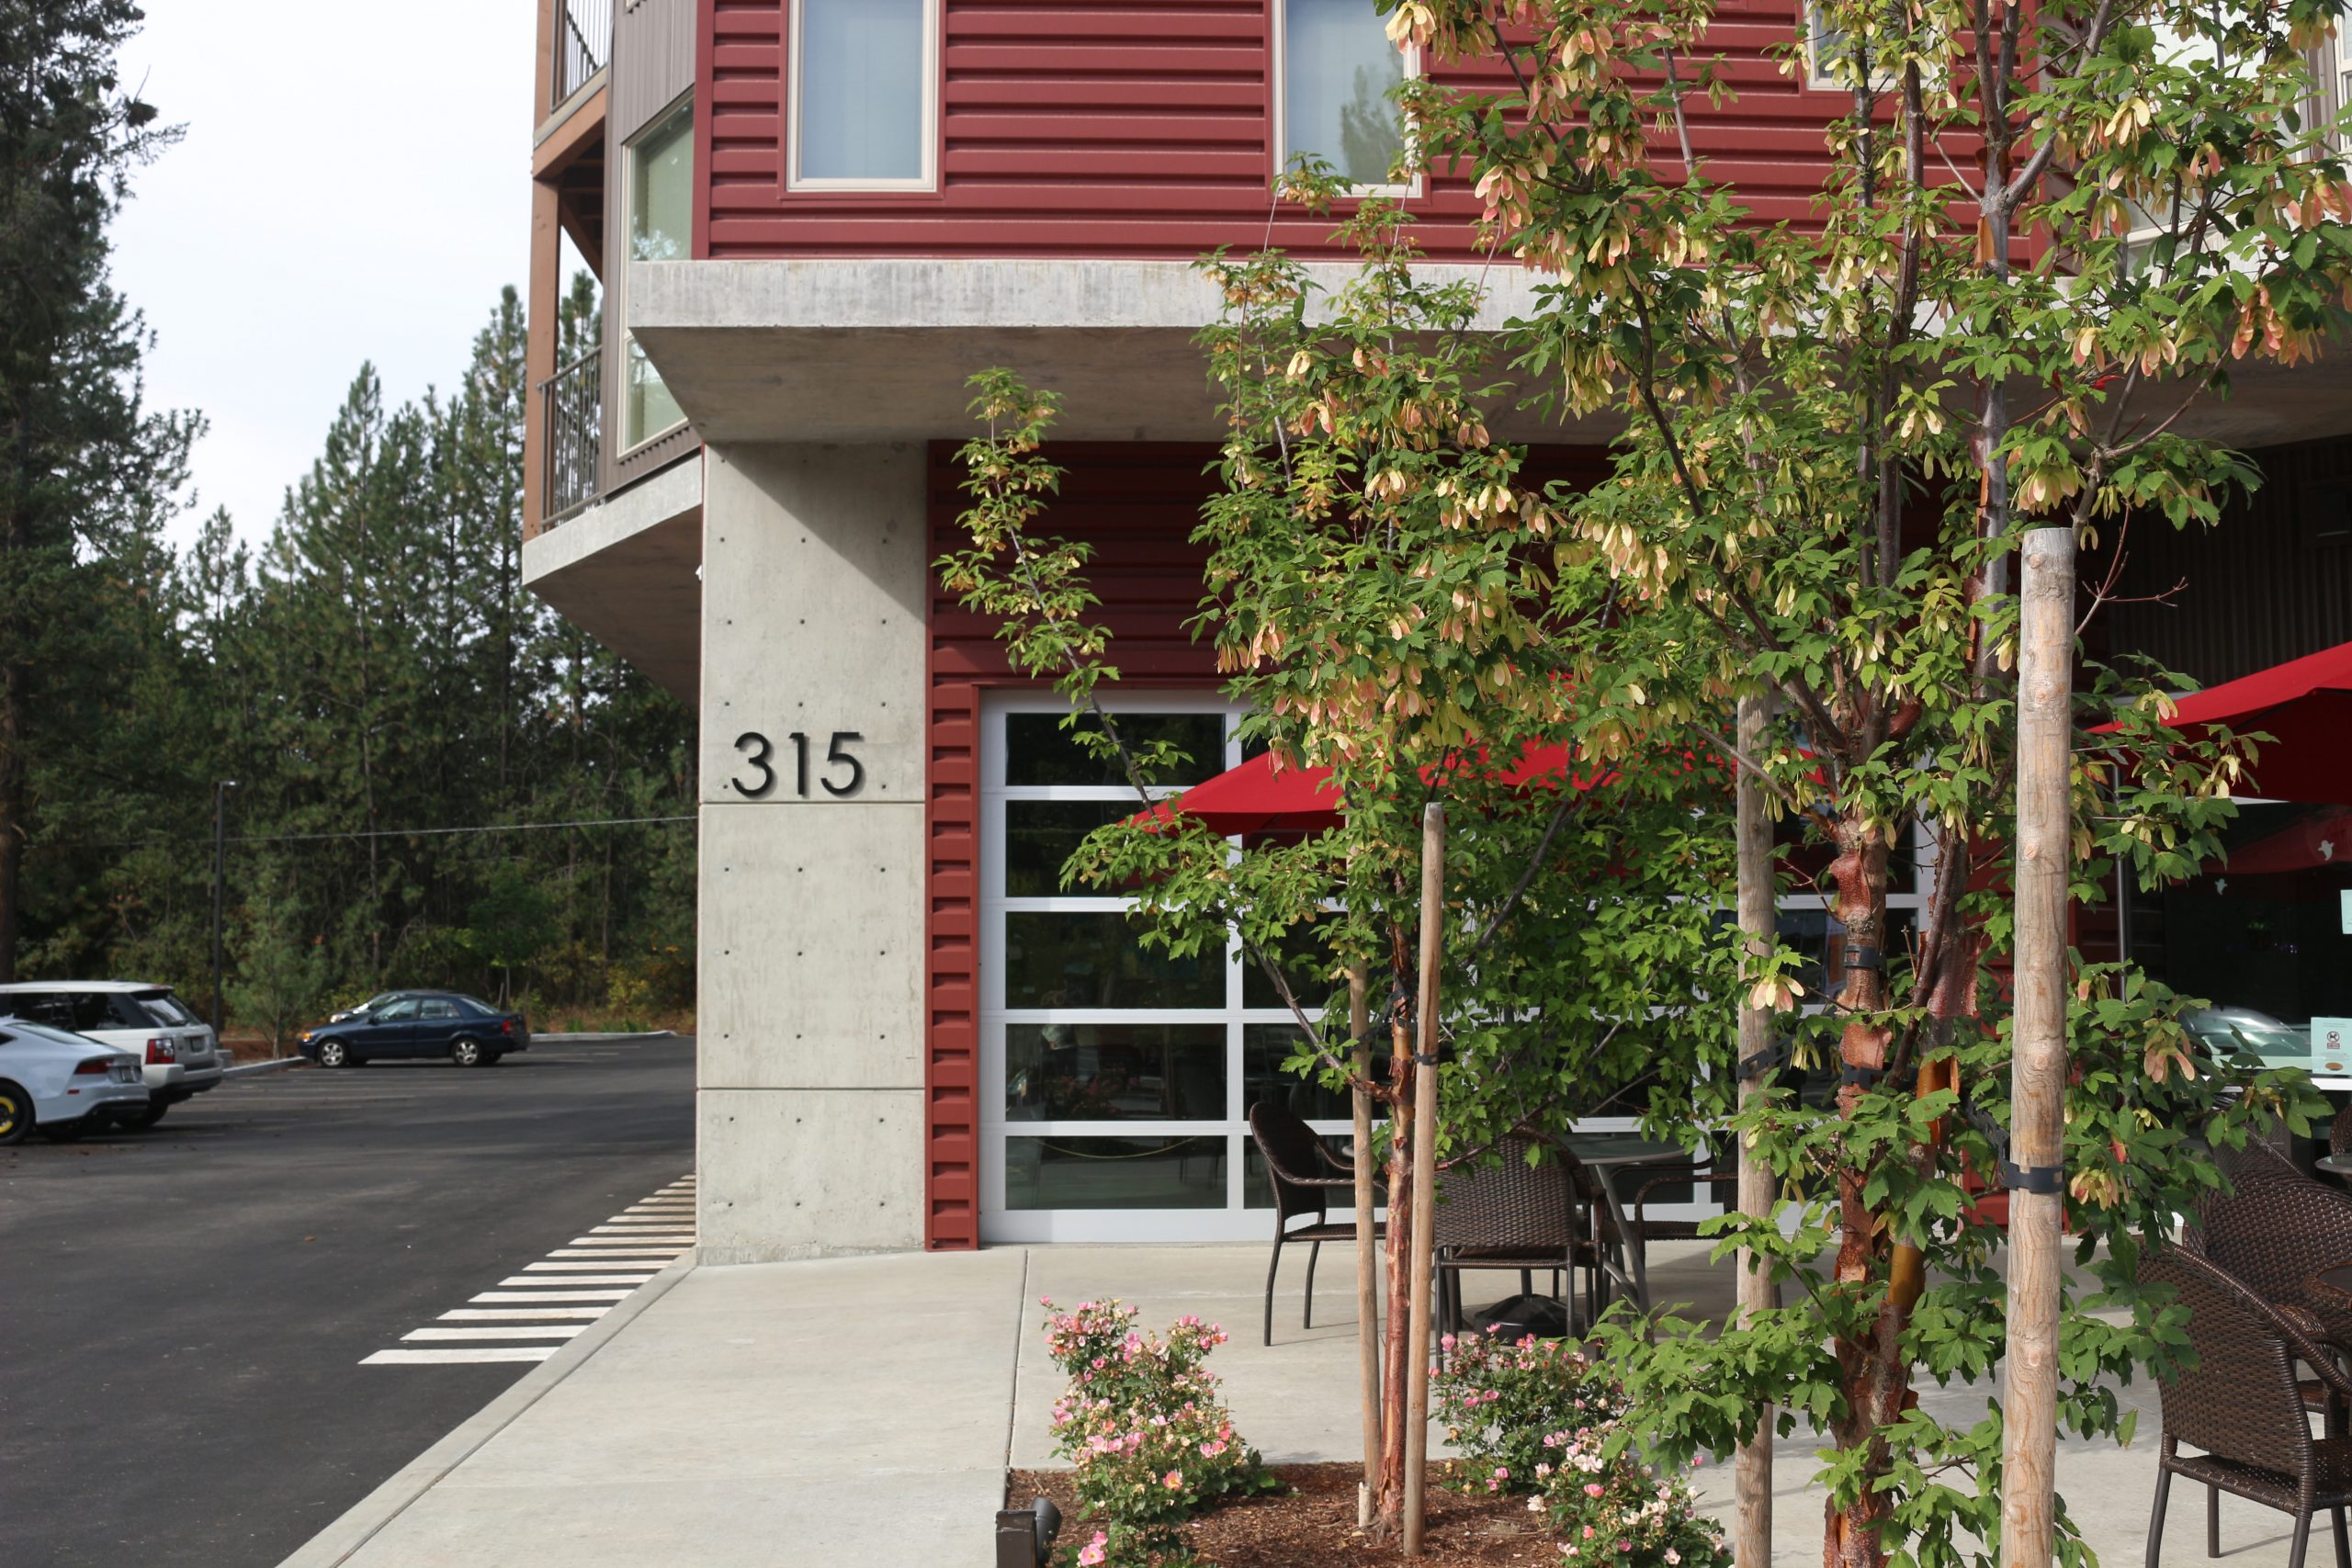 Lake Drive Apartments is a mixed-use project located in Coeur d'Alene Idaho and features a retail space that includes the local Bakery by the Lake.